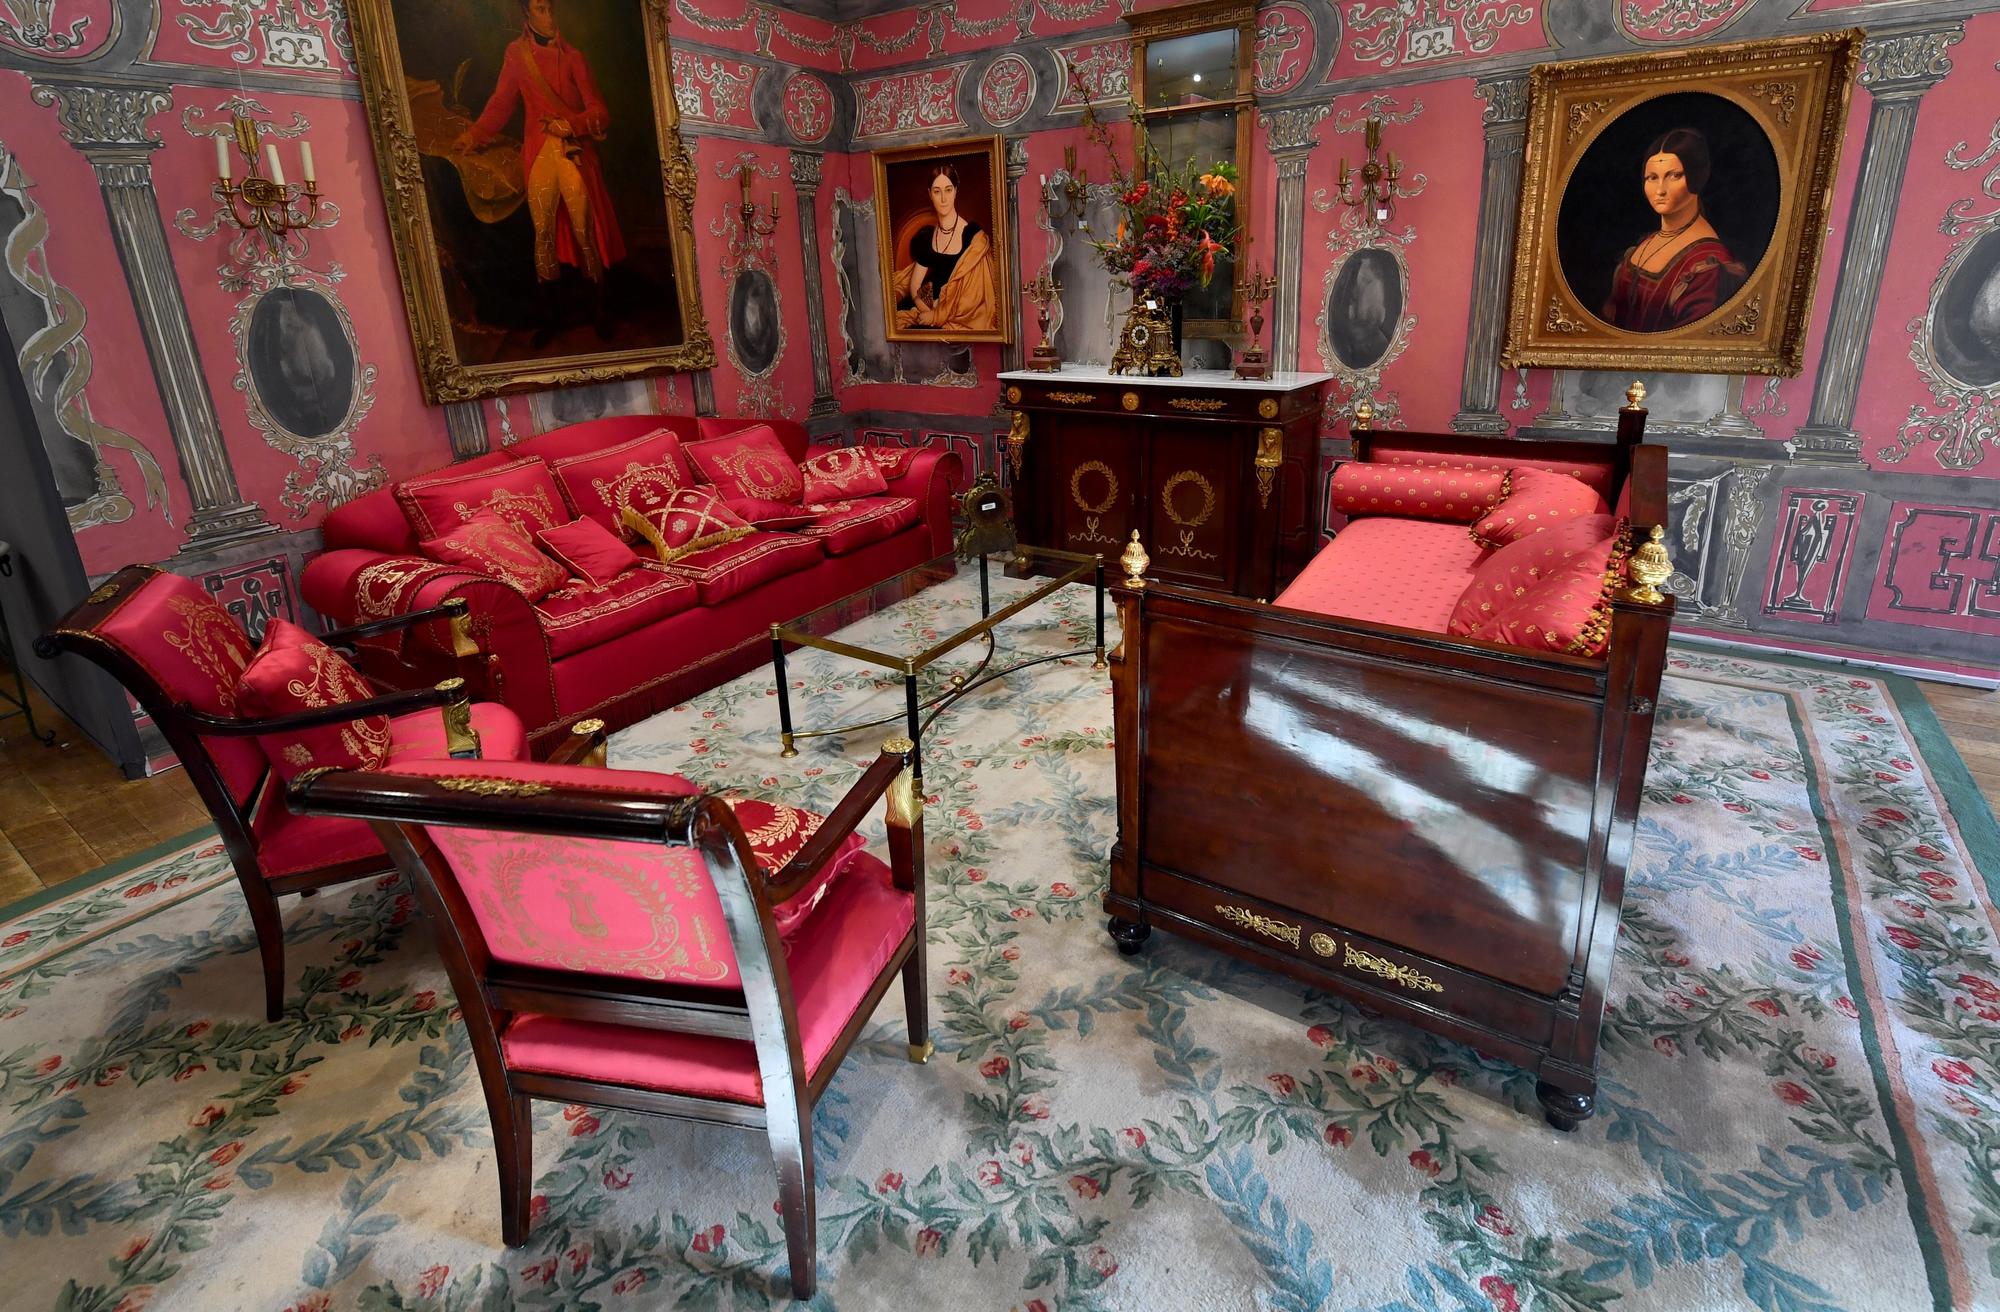 This file photo taken on April 11, 2018 shows furnitures from "La Suite Imperiale" of Paris' Ritz Paris, as part of the 10,000 Ritz objects set to be auctioned by the Artcurial auction house on April 17 in Paris. The auction comes six years after the 159-bedroom hotel was closed for a four-year renovation project in 2012, with all of the objects coming from before the revamp.GERARD JULIEN / AFP [AFP - Gerard Julien]